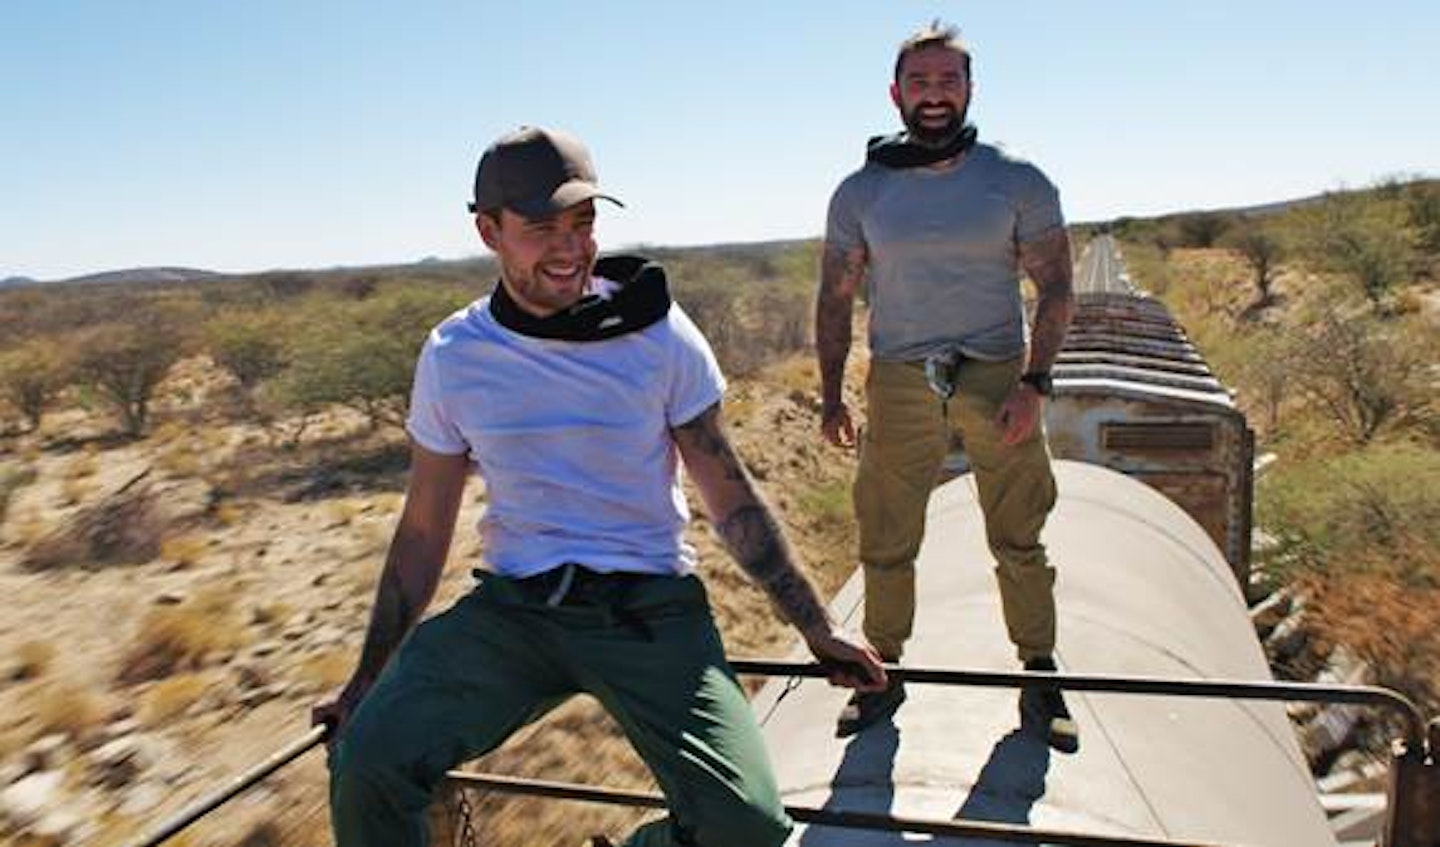 Liam and Ant in Namibia